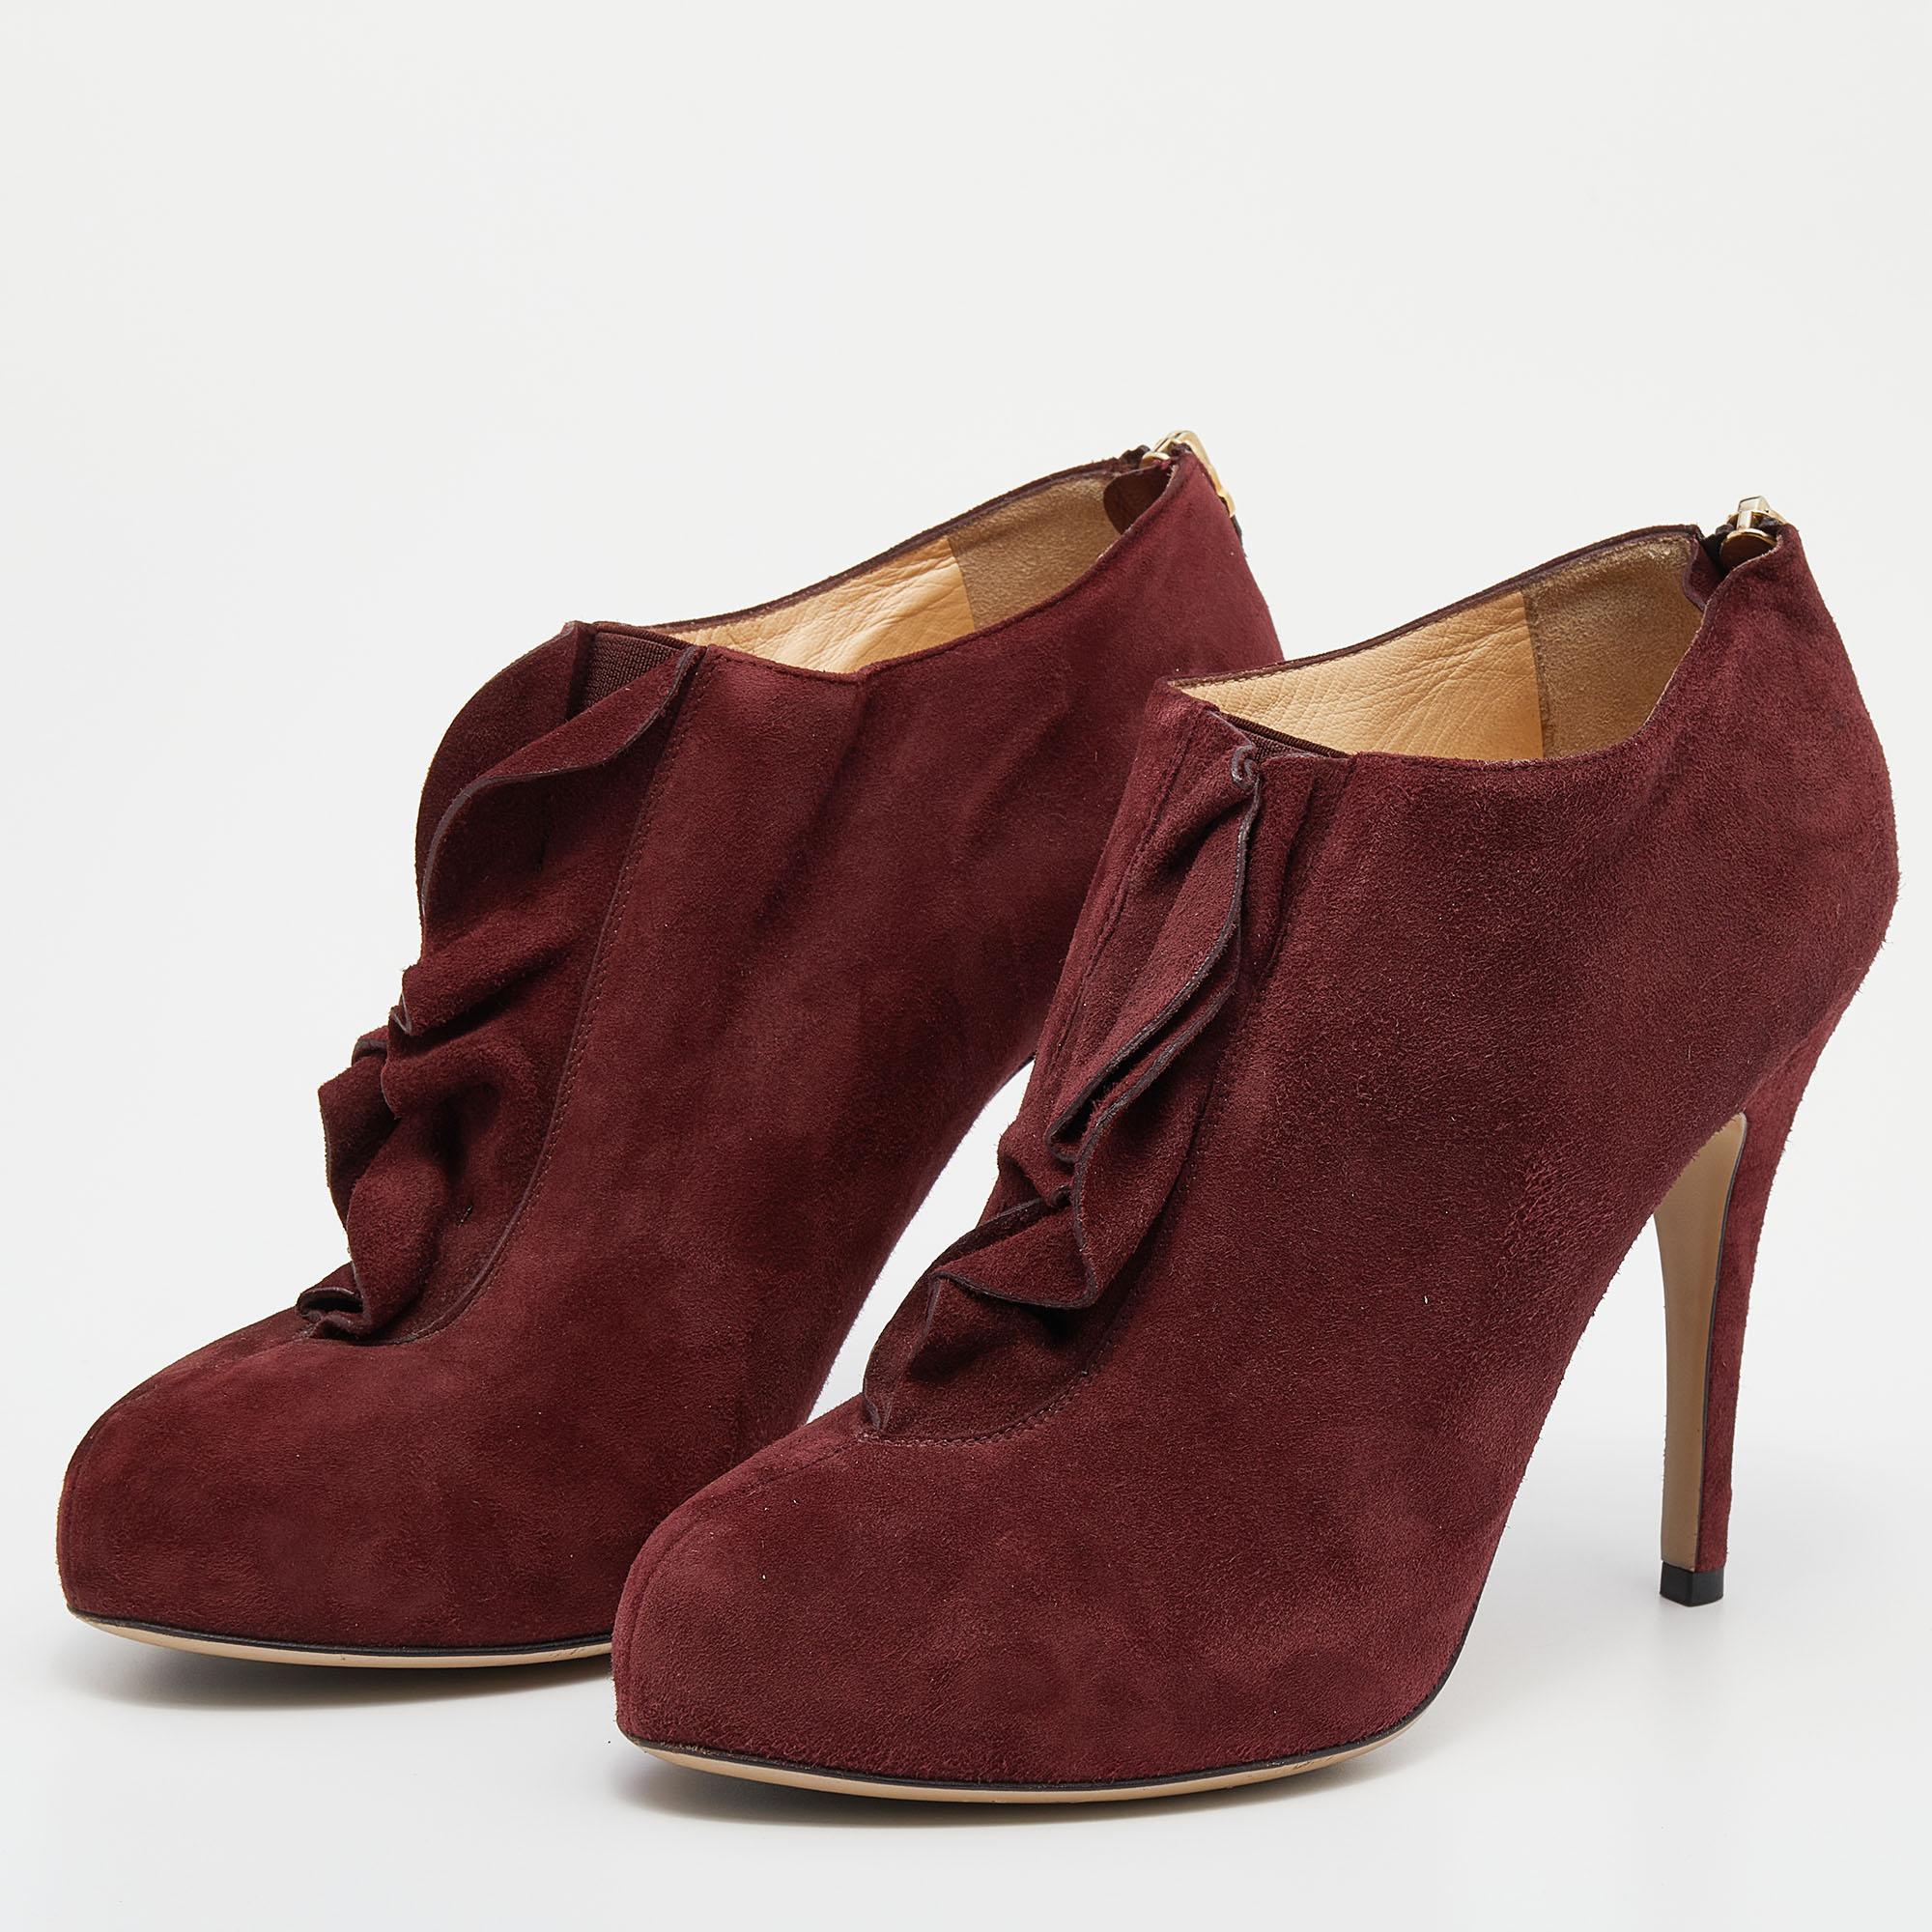 Made in Italy, this pair of Valentino ankle booties is beautifully designed with red suede. The shoes have covered toes, ruffle trim & elastic insert on the uppers, and simple zipper fastenings on the counters. The slim heels give the design a grand